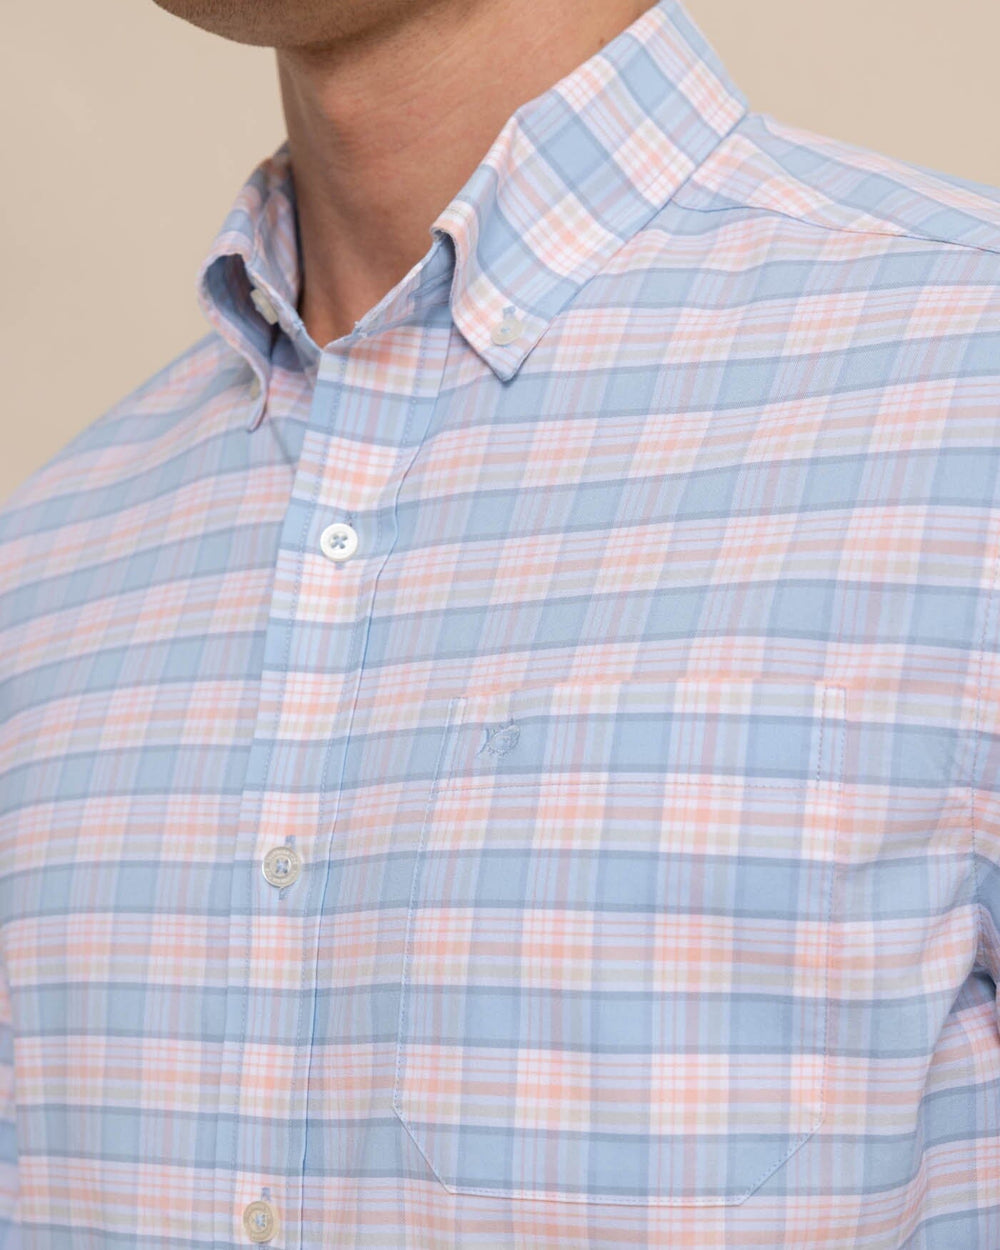 The detail view of the Southern Tide Coastal Passage Brockman Plaid Long Sleeve SportShirt by Southern Tide - Clearwater Blue